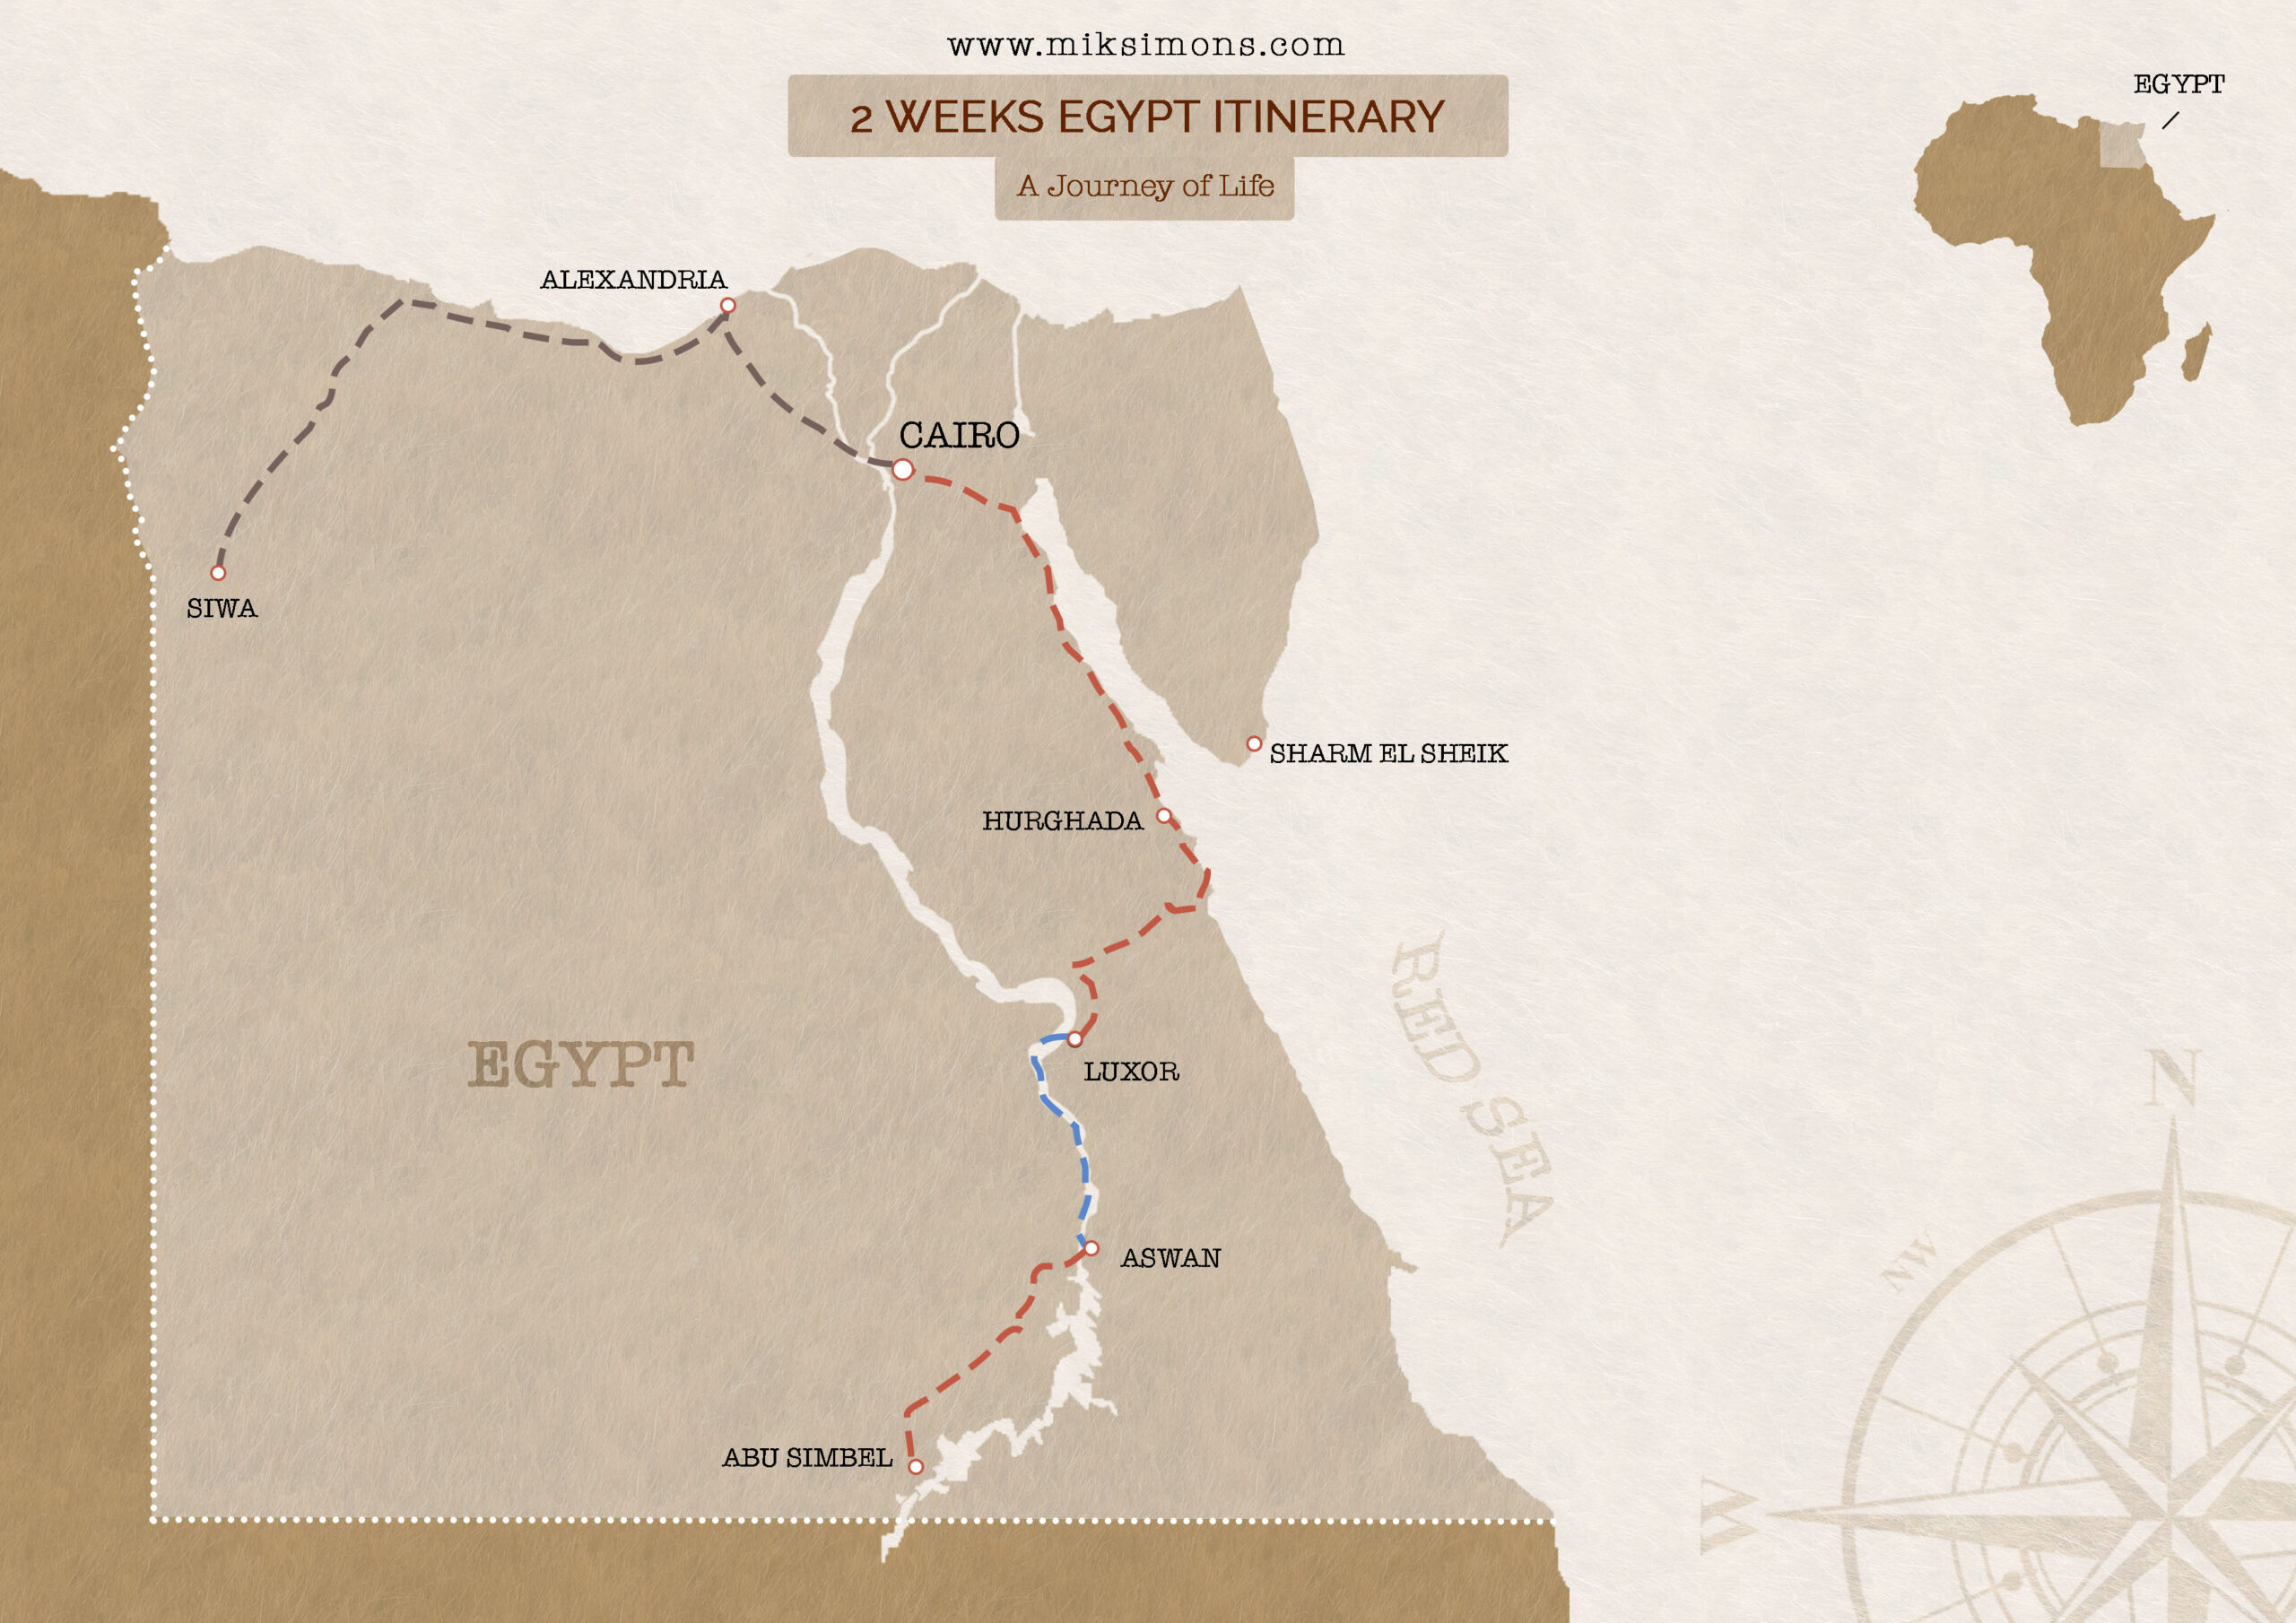 2 weeks in Egypt Itinerary 2022 - Adventure Map of Namibia